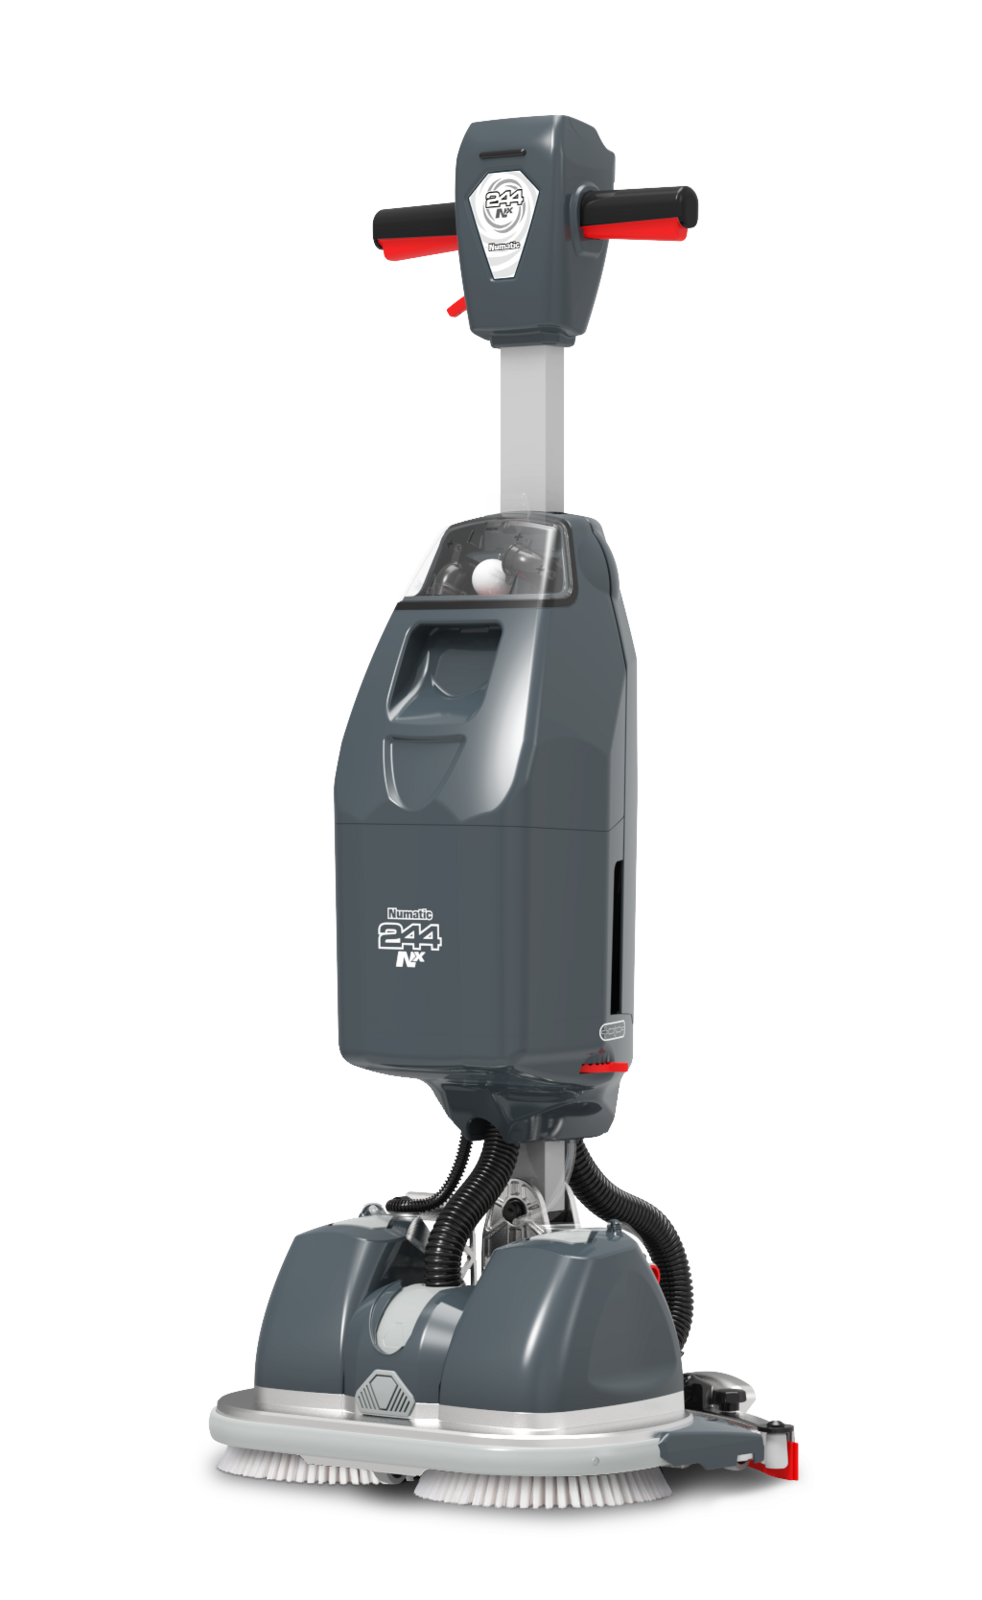 Numatic 244NX Compact Scrubber Dryer with Batteries